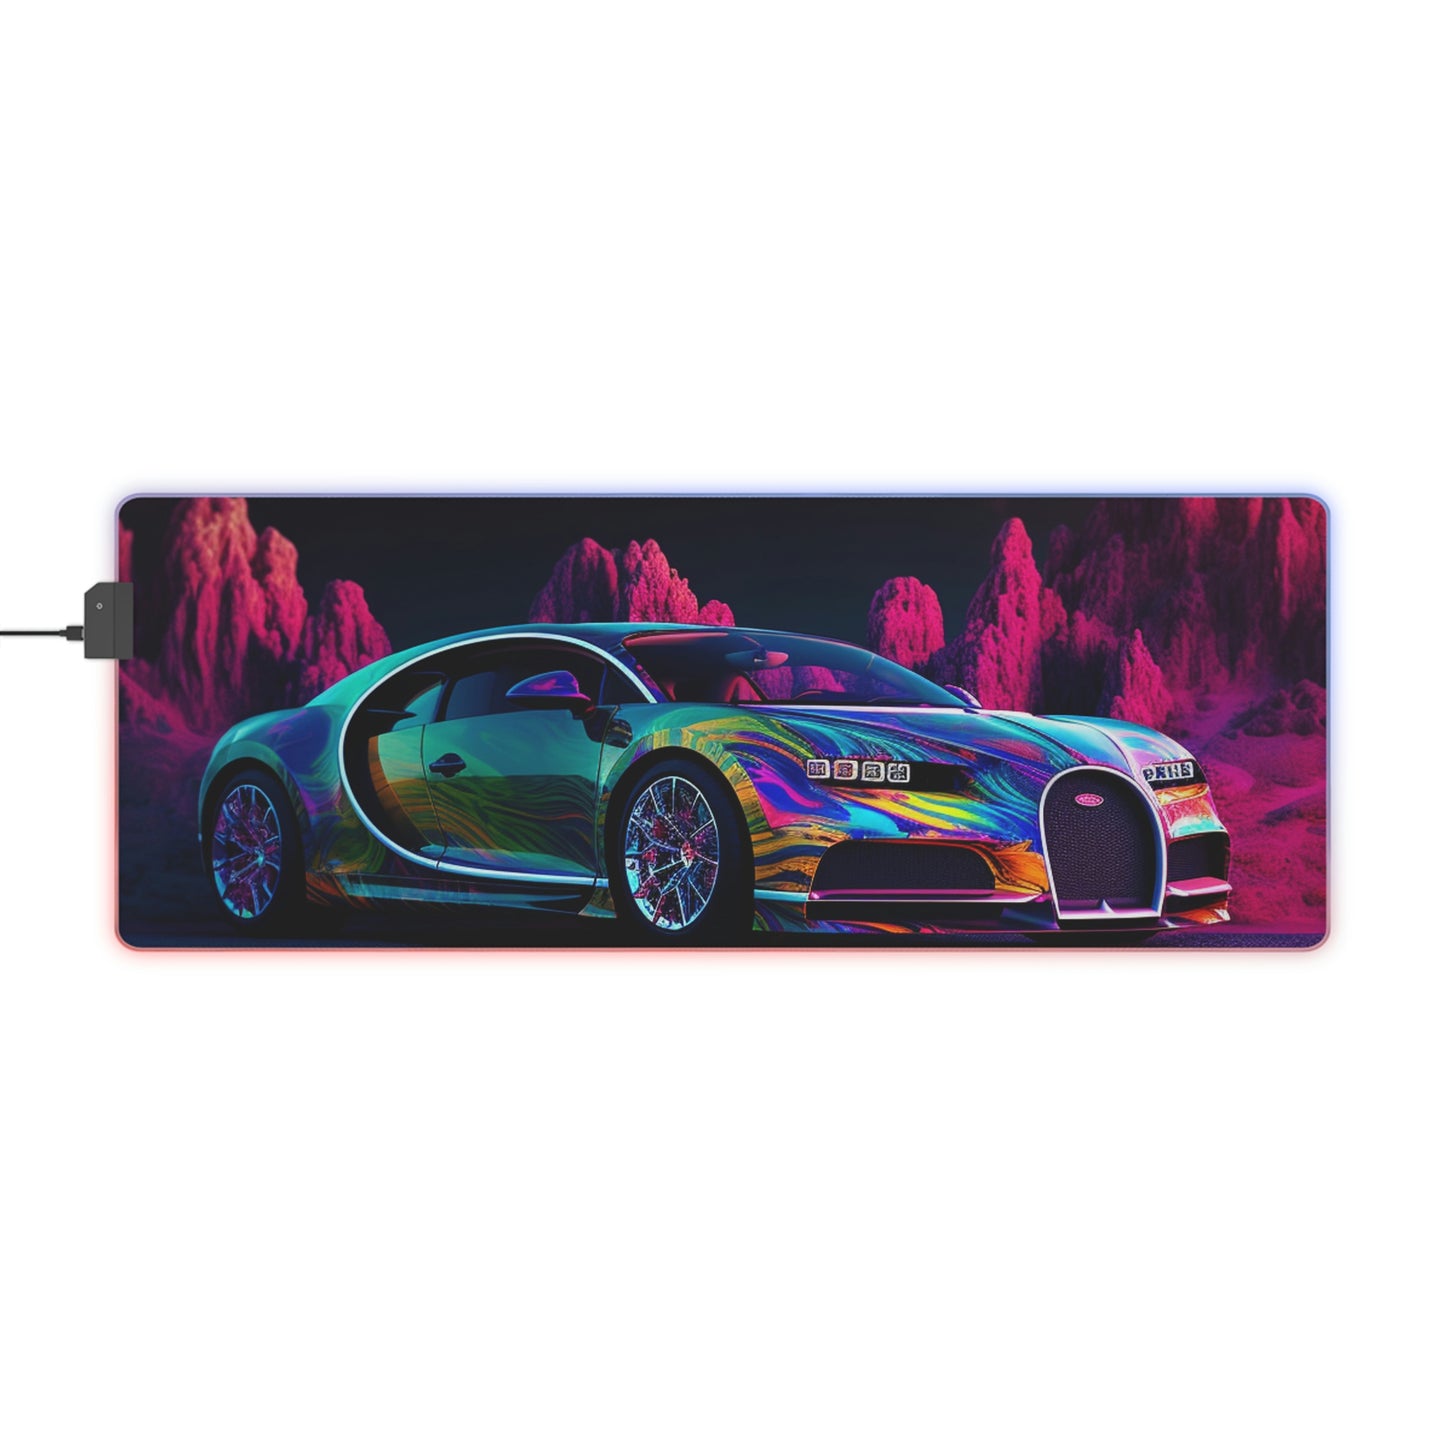 LED Gaming Mouse Pad Florescent Bugatti Flair 2